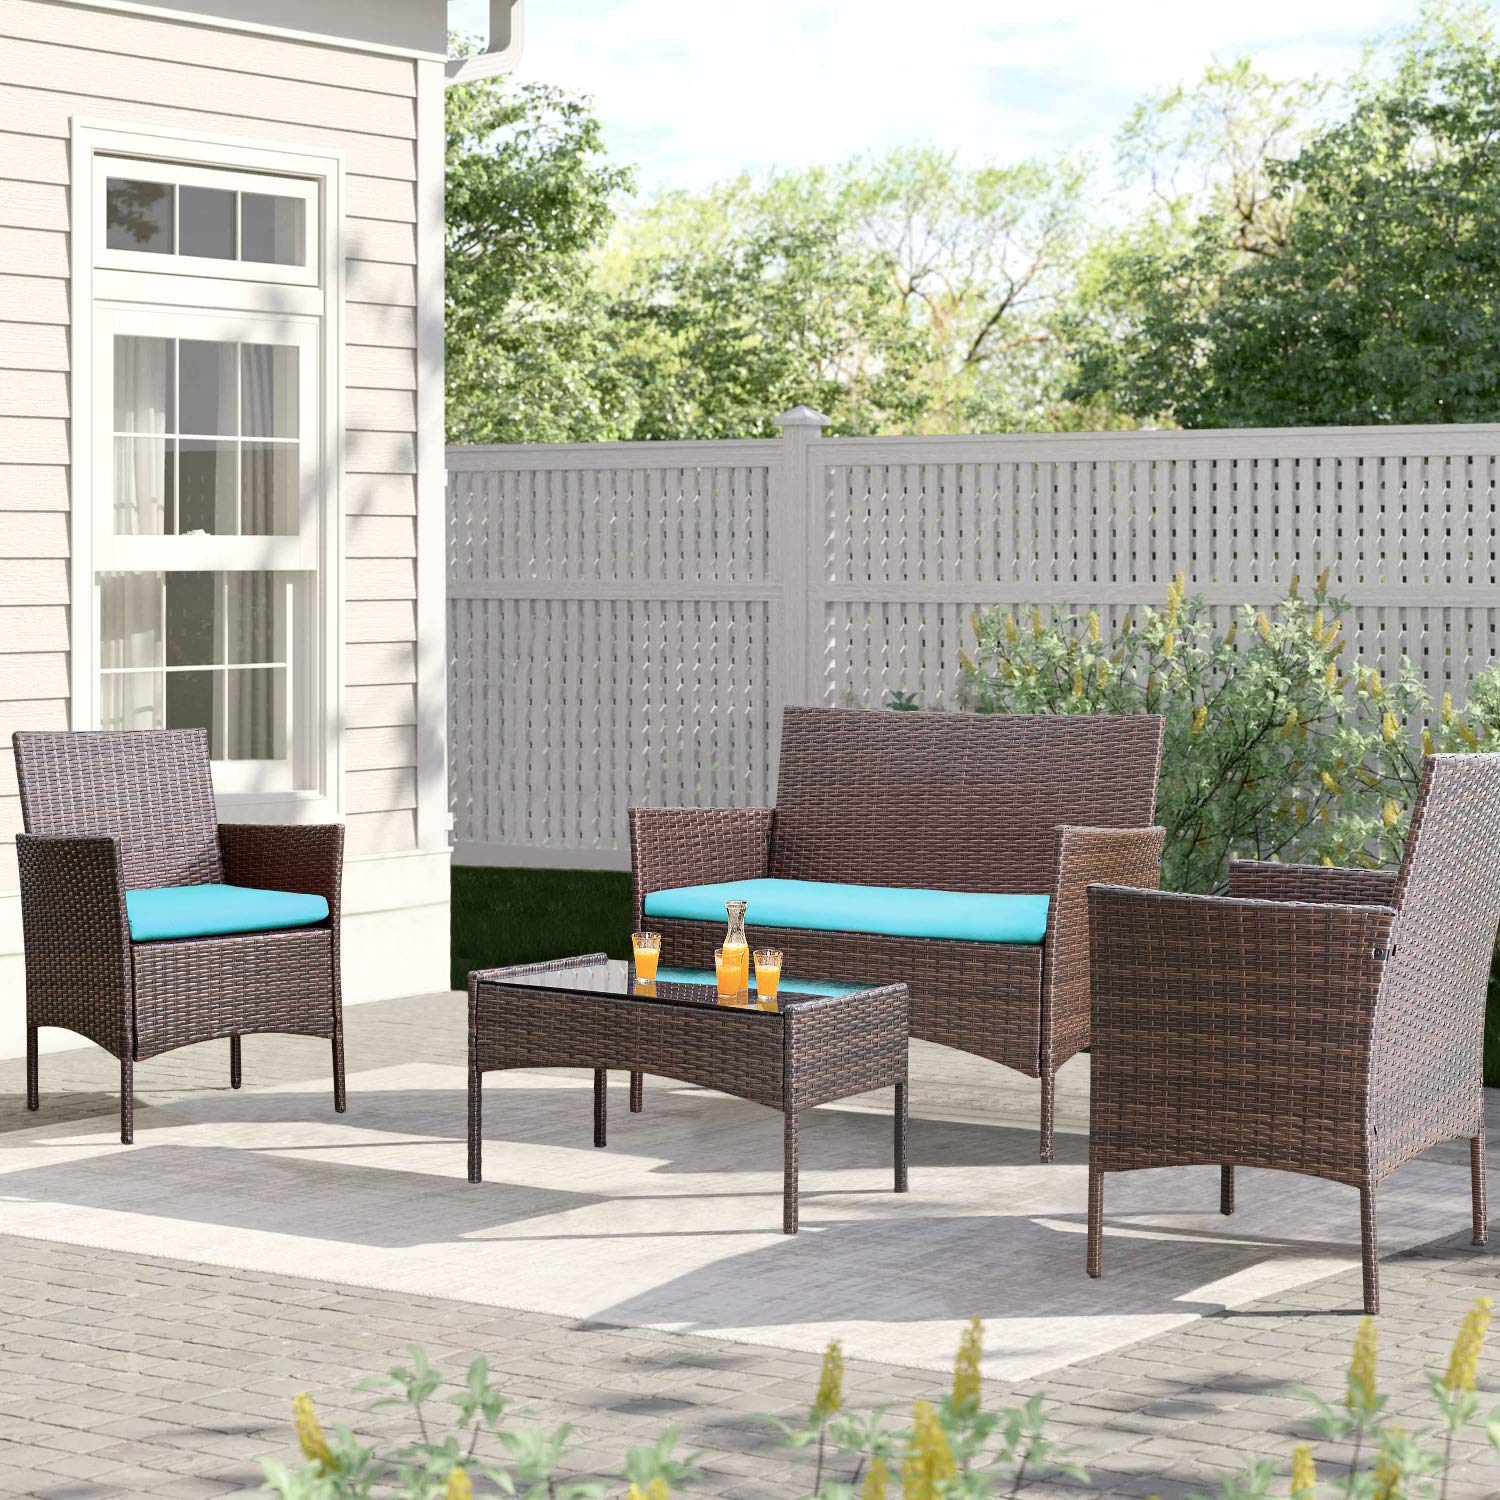 Looking For Durable Outdoor Furniture This Year. Try The Brookbury 5 Piece Wicker Set